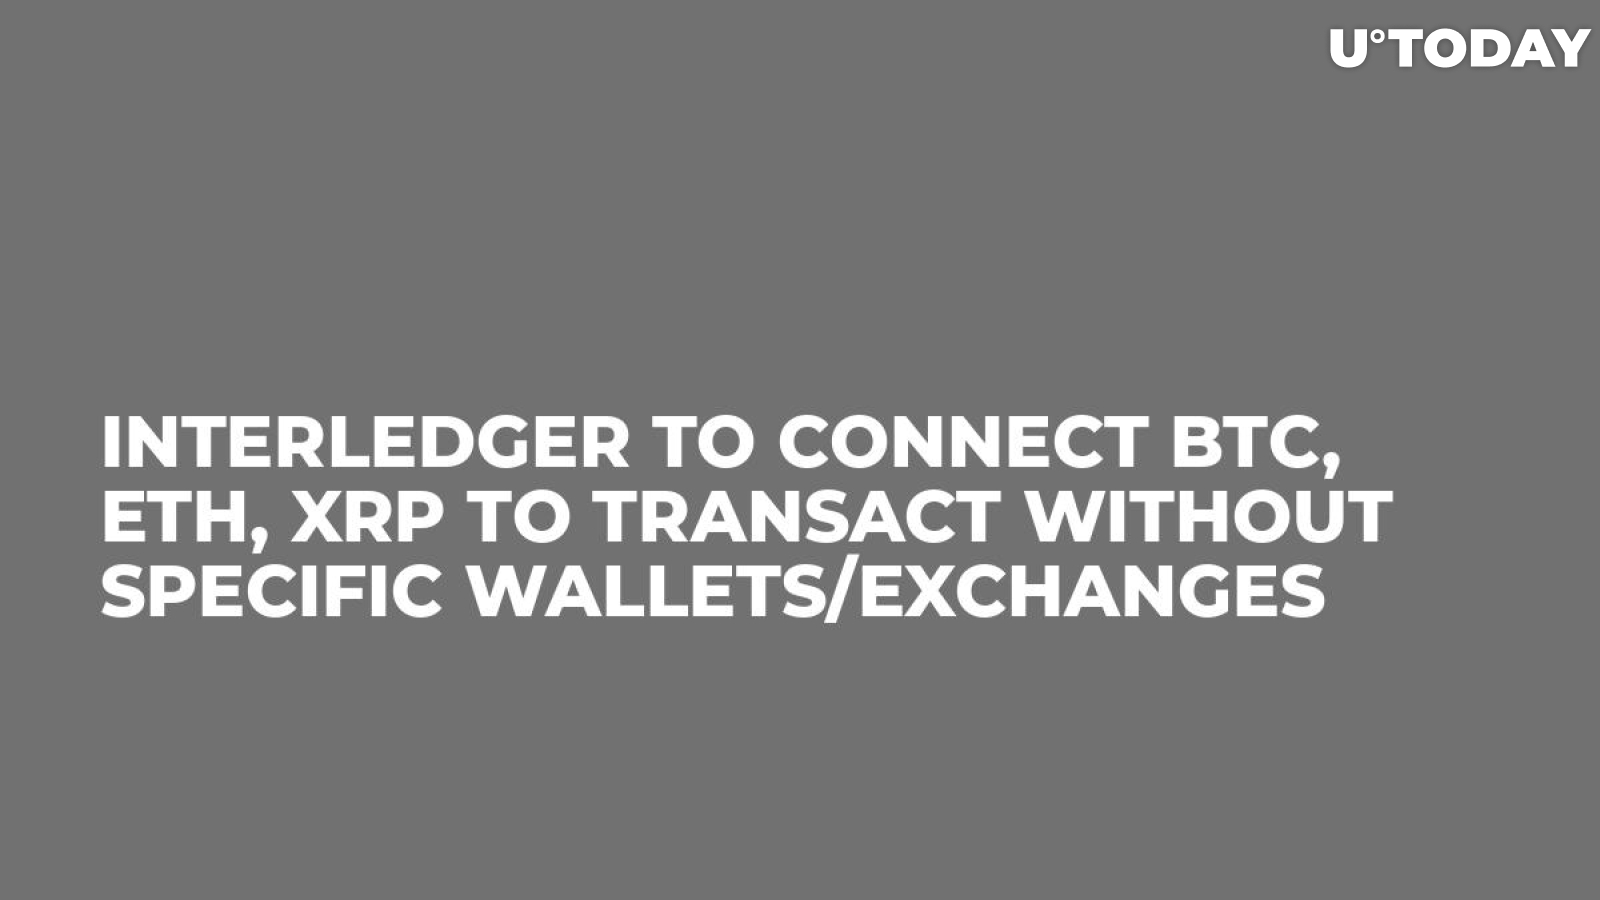 Interledger to Connect BTC, ETH, XRP to Transact without Specific Wallets/Exchanges